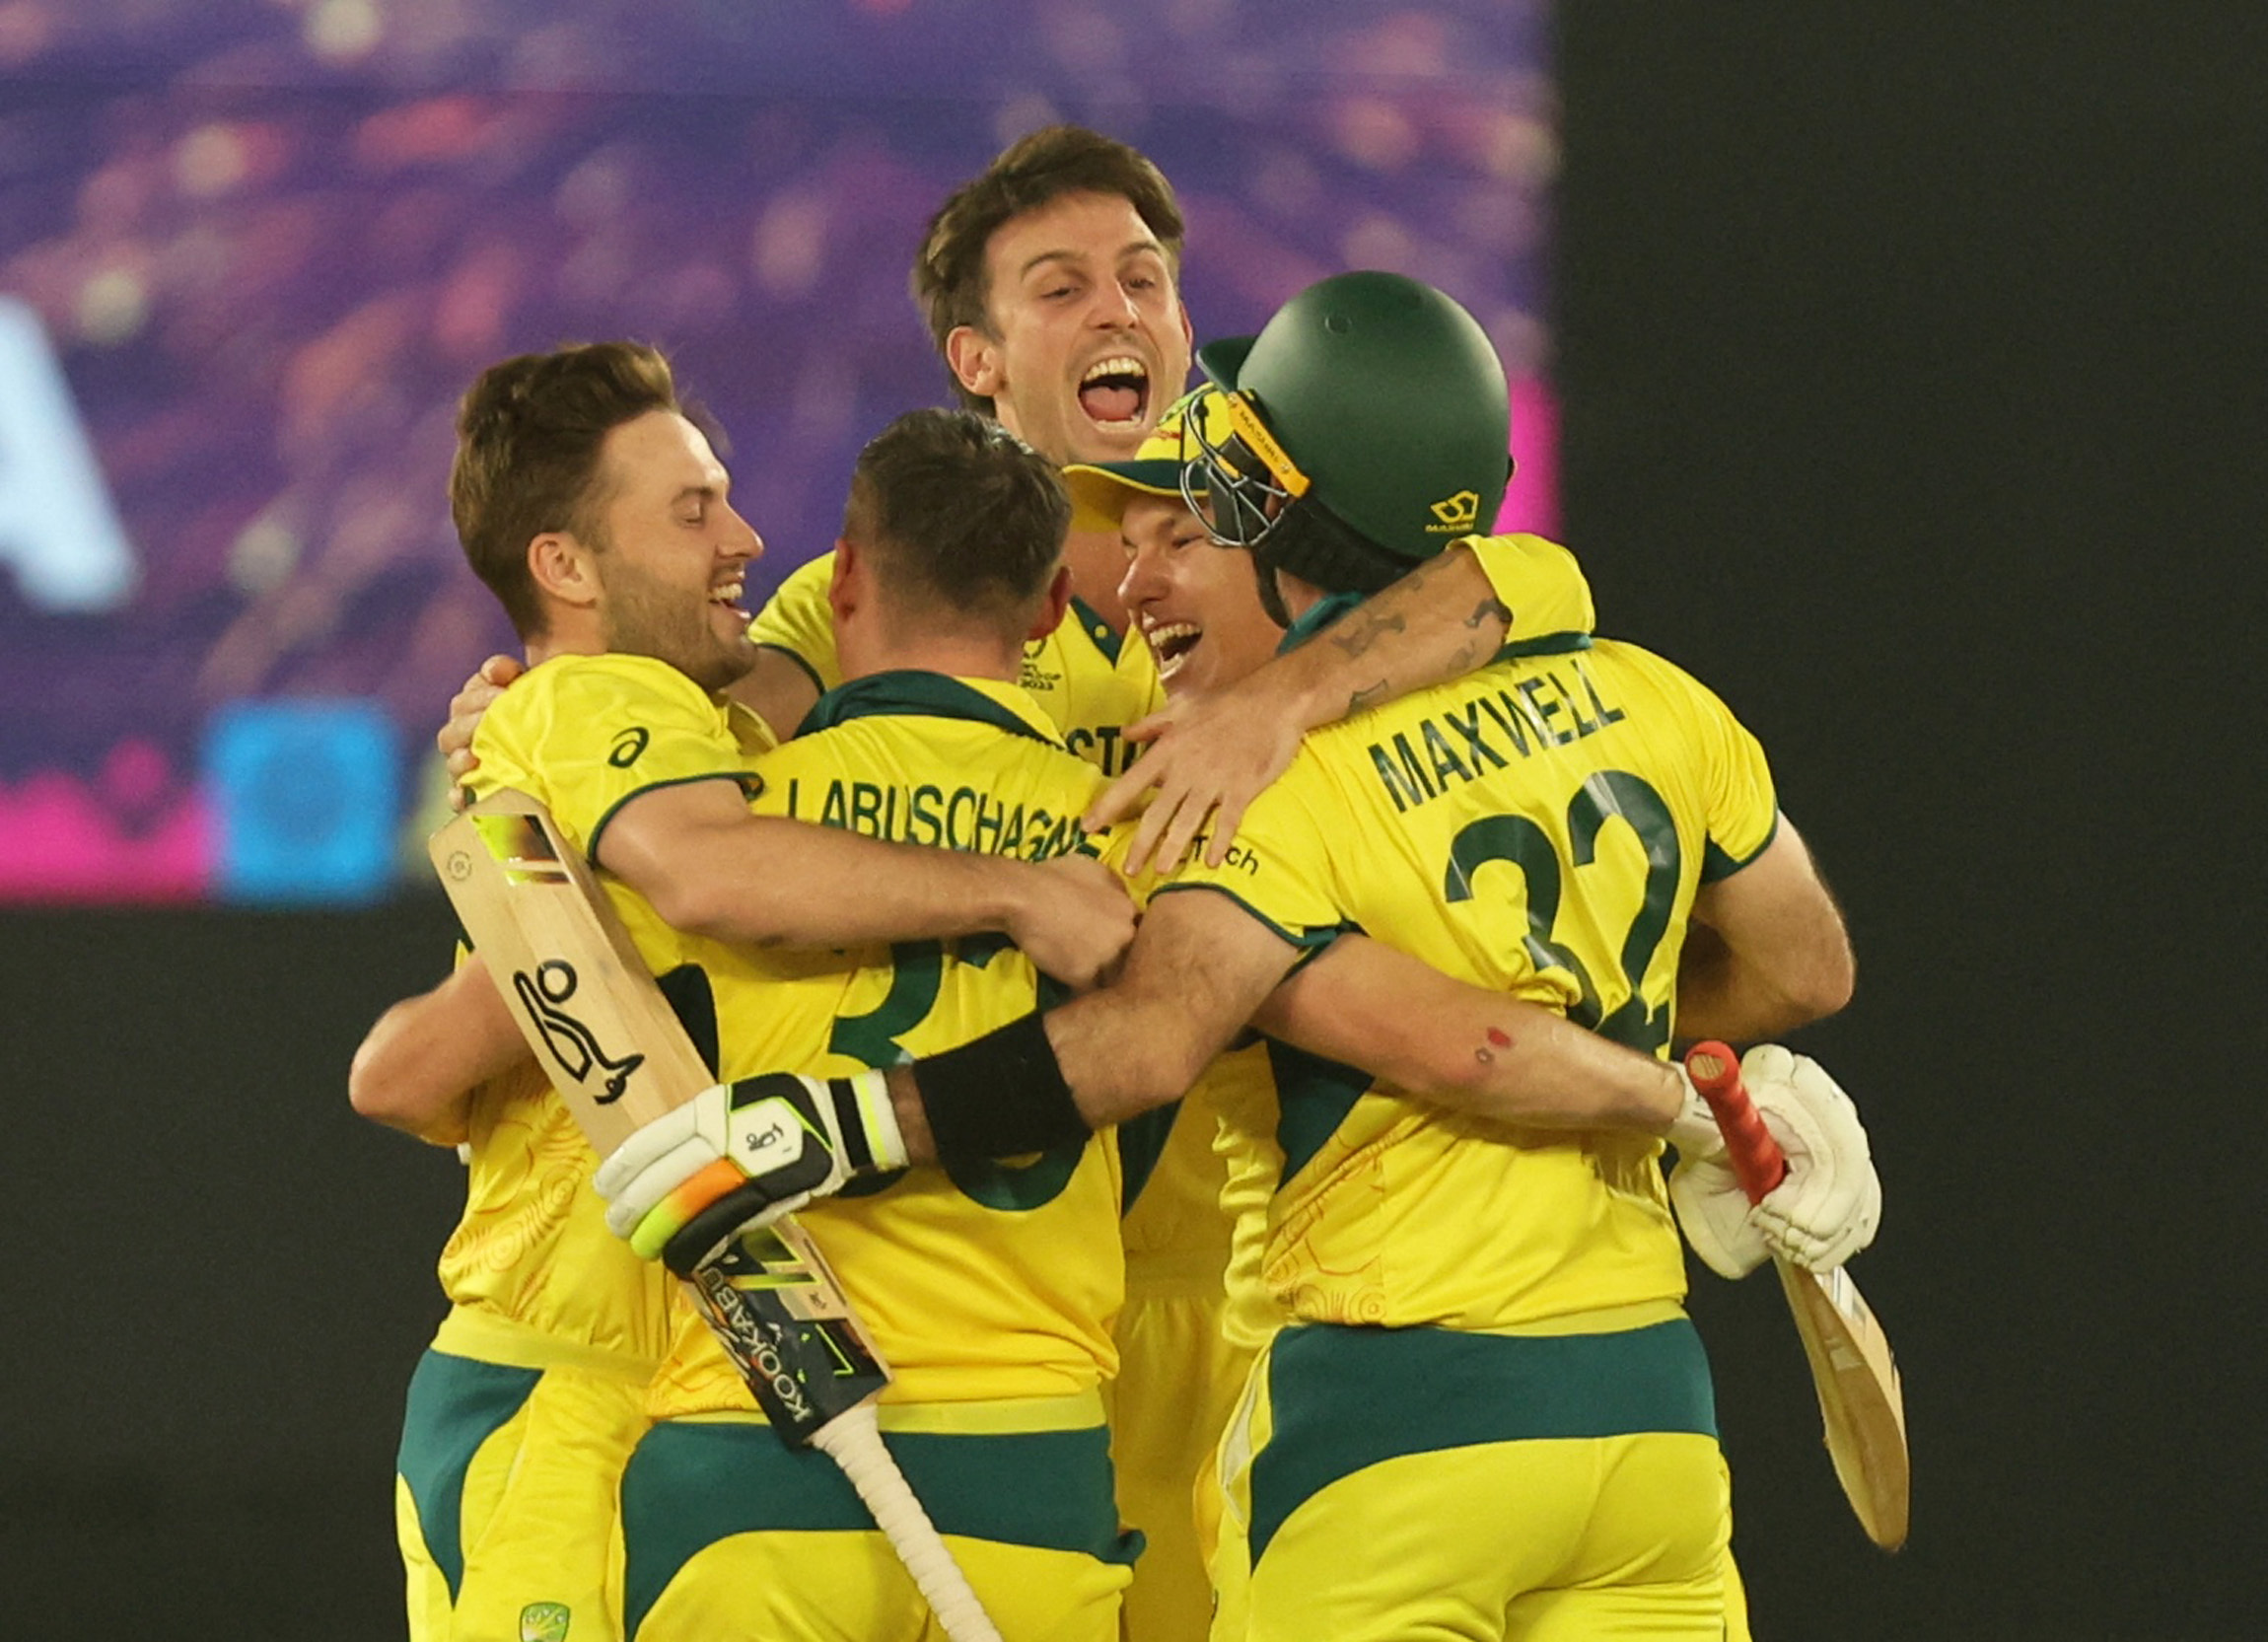 Australia won the title for the sixth time after India defeat in the World Cup final